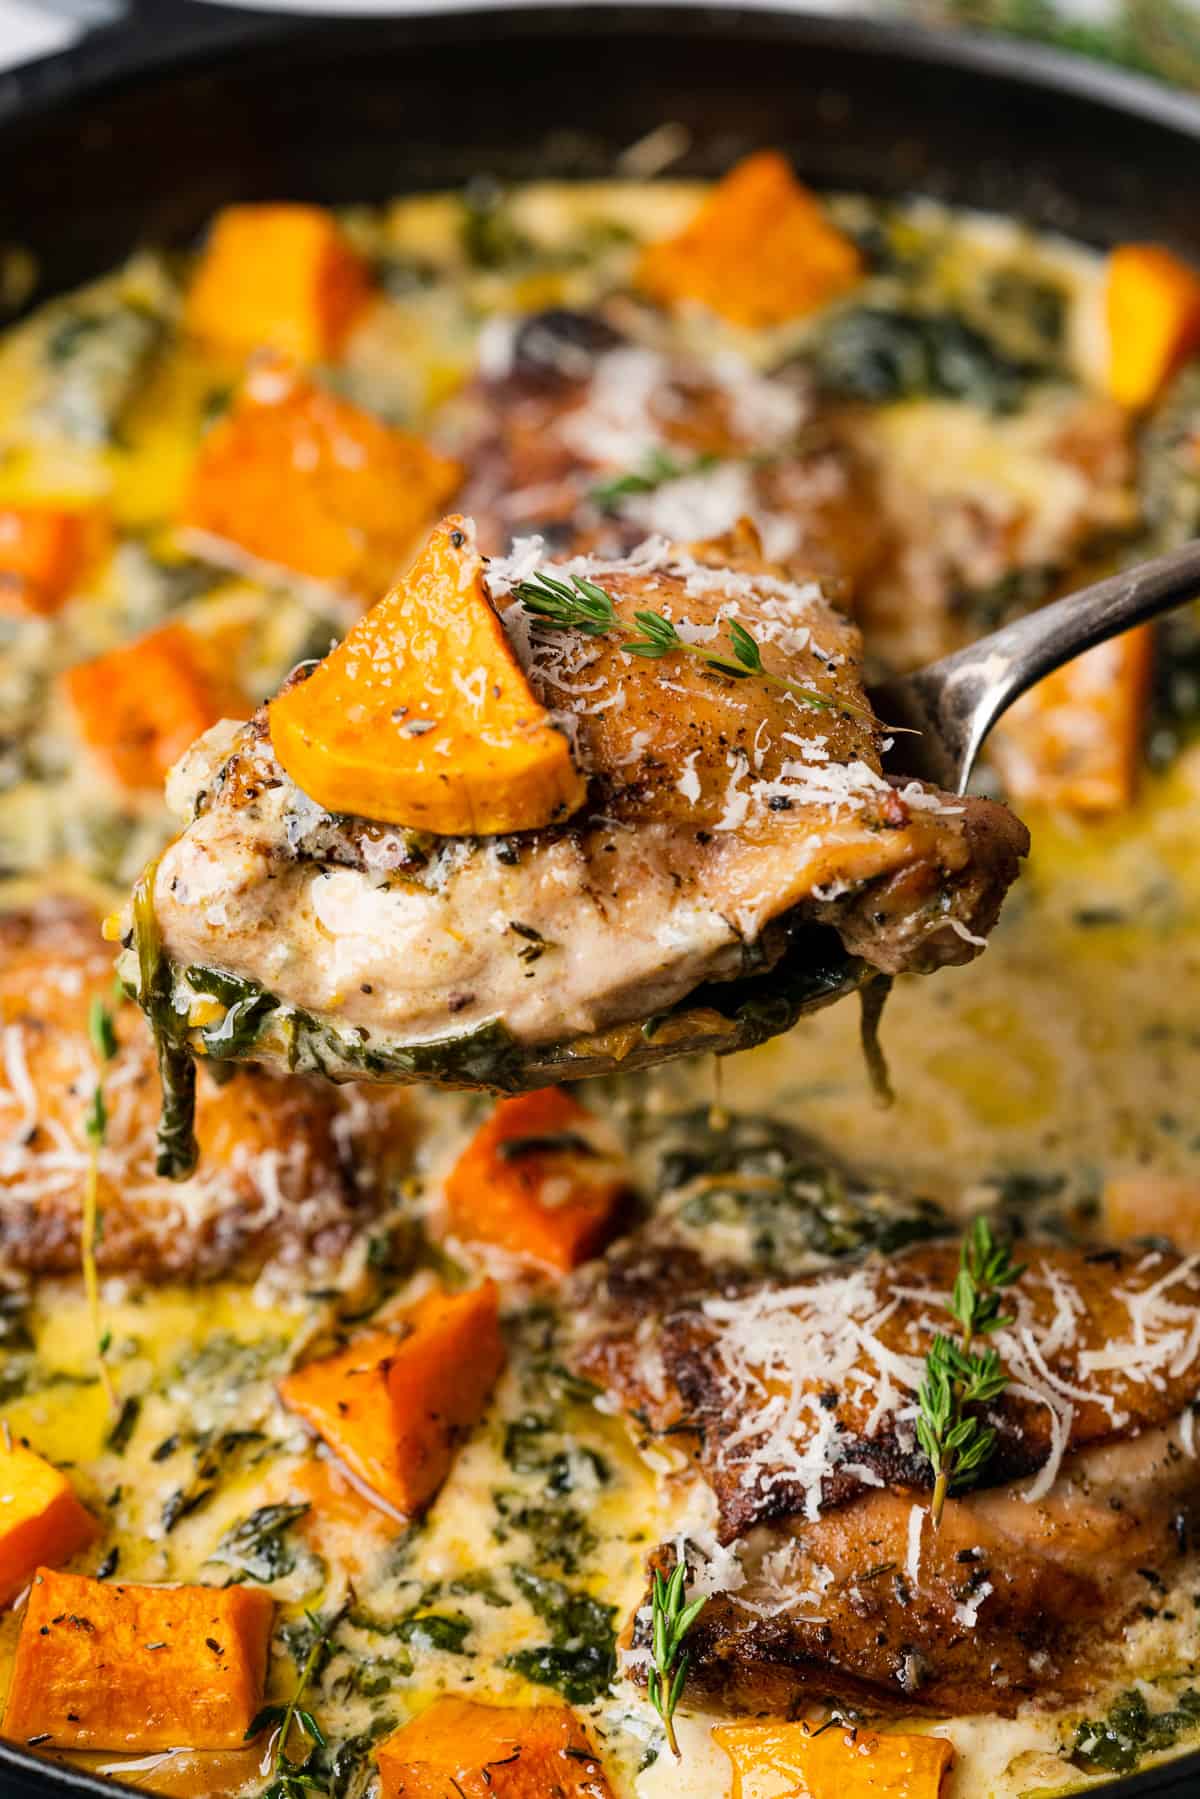 Chicken thigh with parmesan, rosemary, and butternut squash being held in a spoon